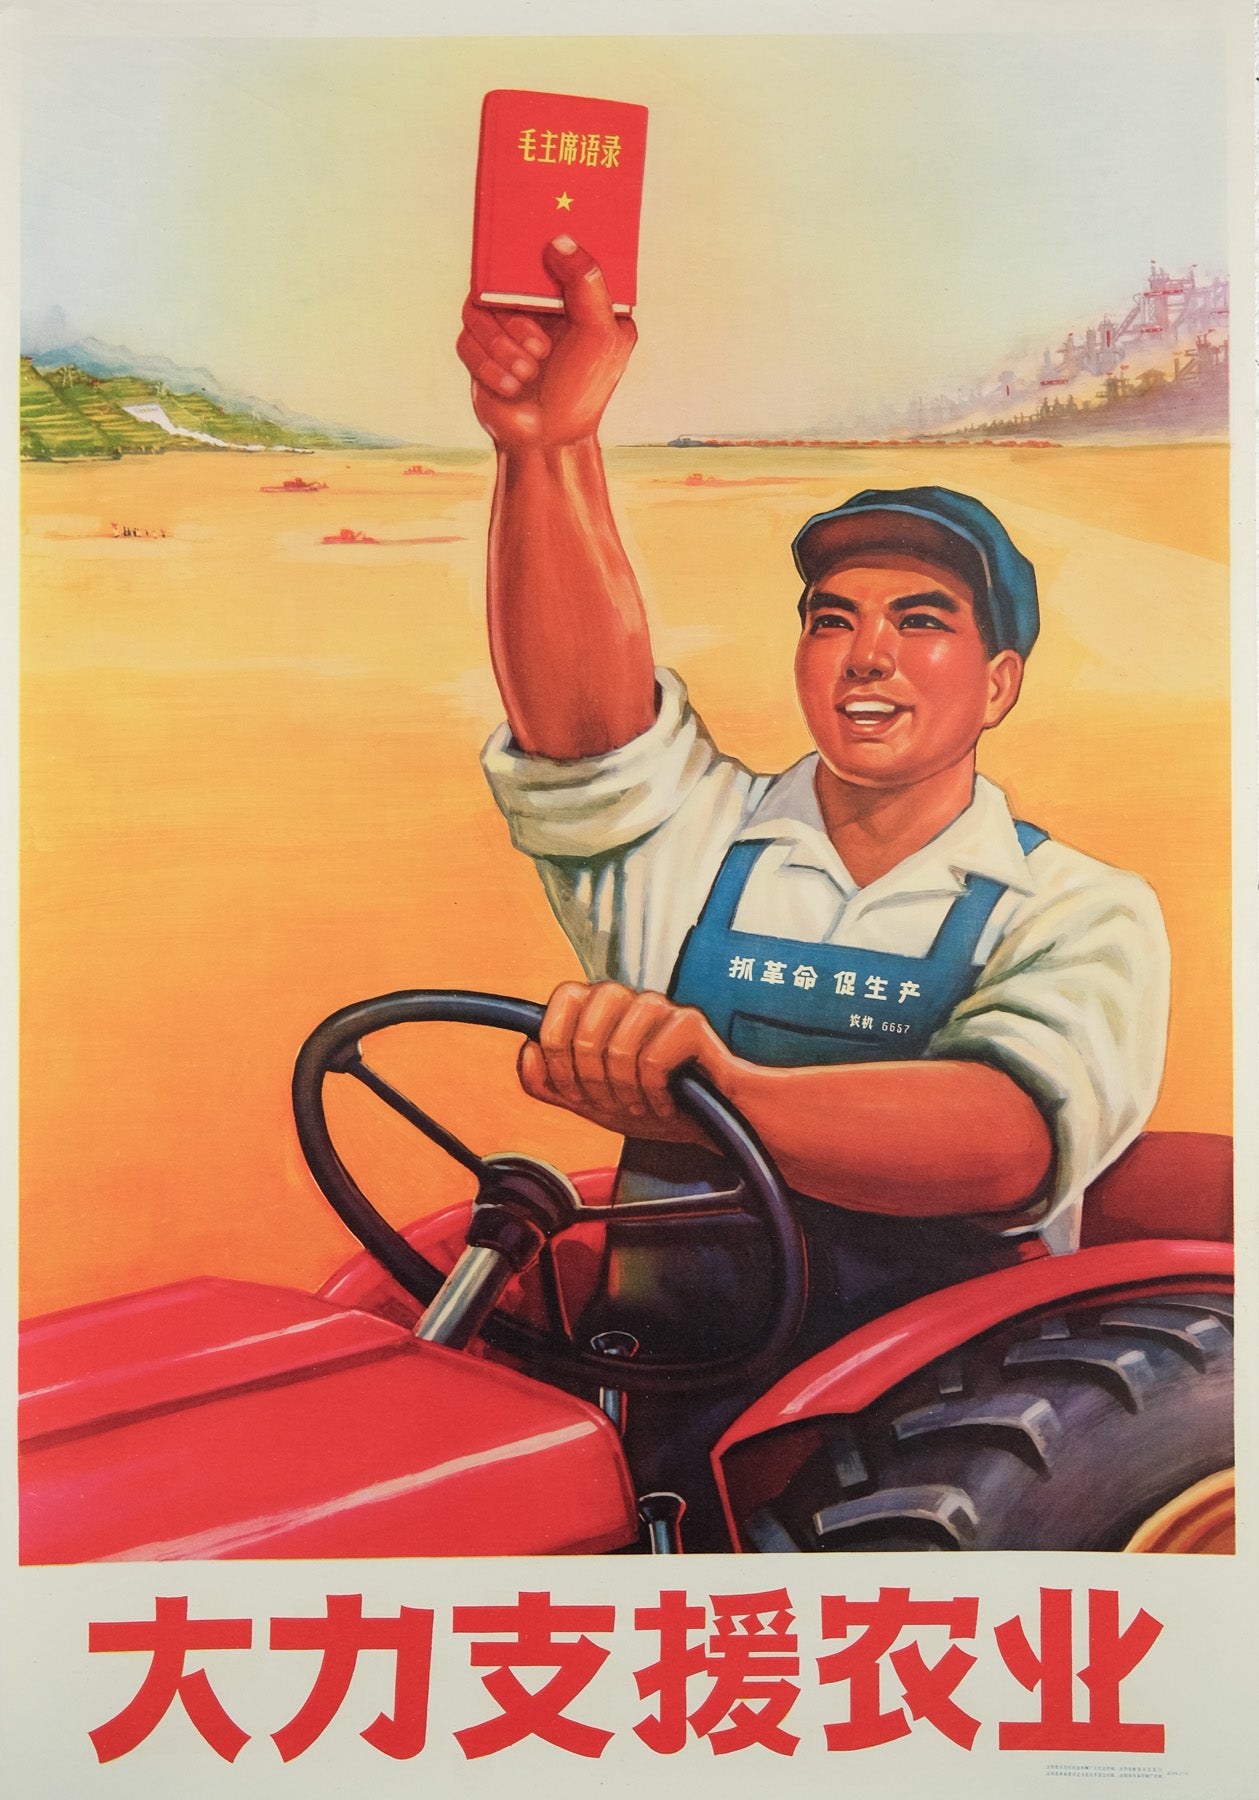 image of the original vintage 1970 Chinese communist propaganda poster titled Greatly support agriculture published by Shenyang City Revolutionary Committee Cultural Department